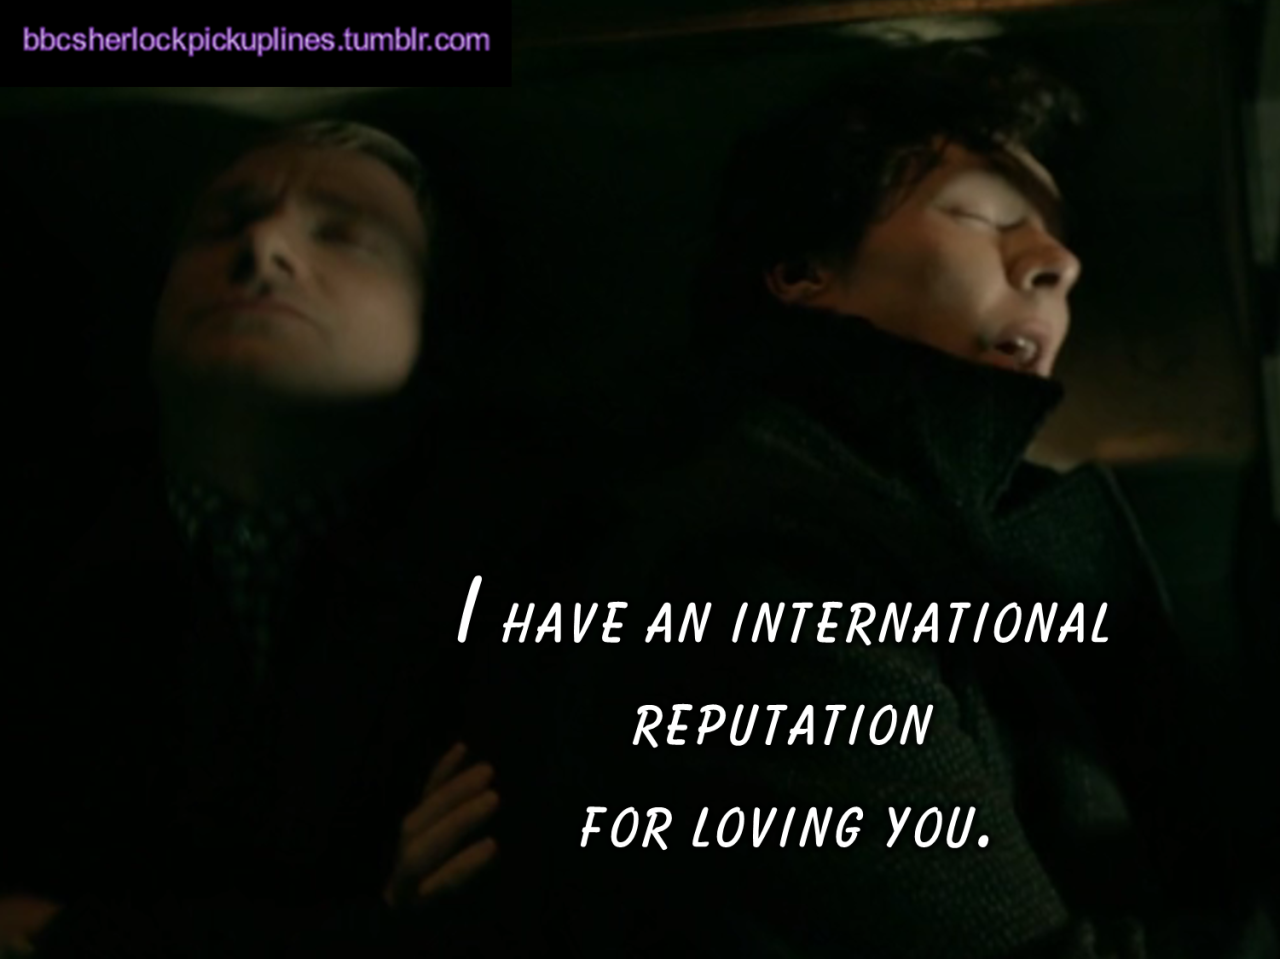 &ldquo;I have an international reputation for loving you.&rdquo; Submitted